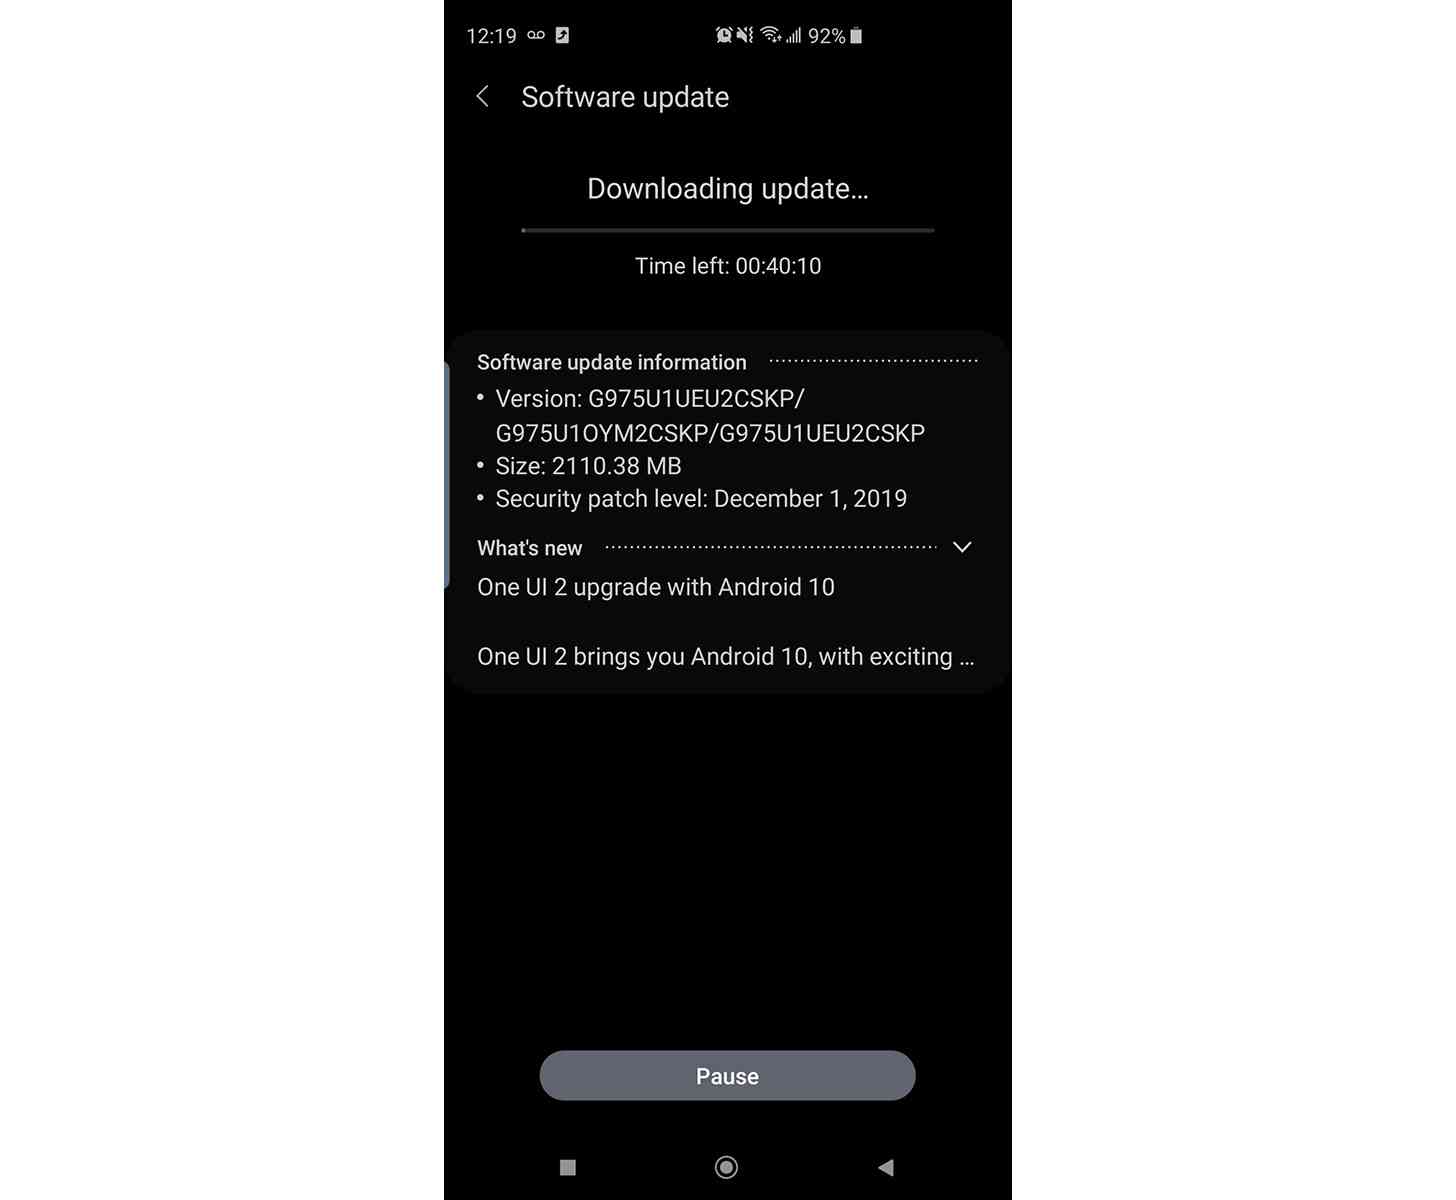 Unlocked Galaxy S10+ Android 10 update